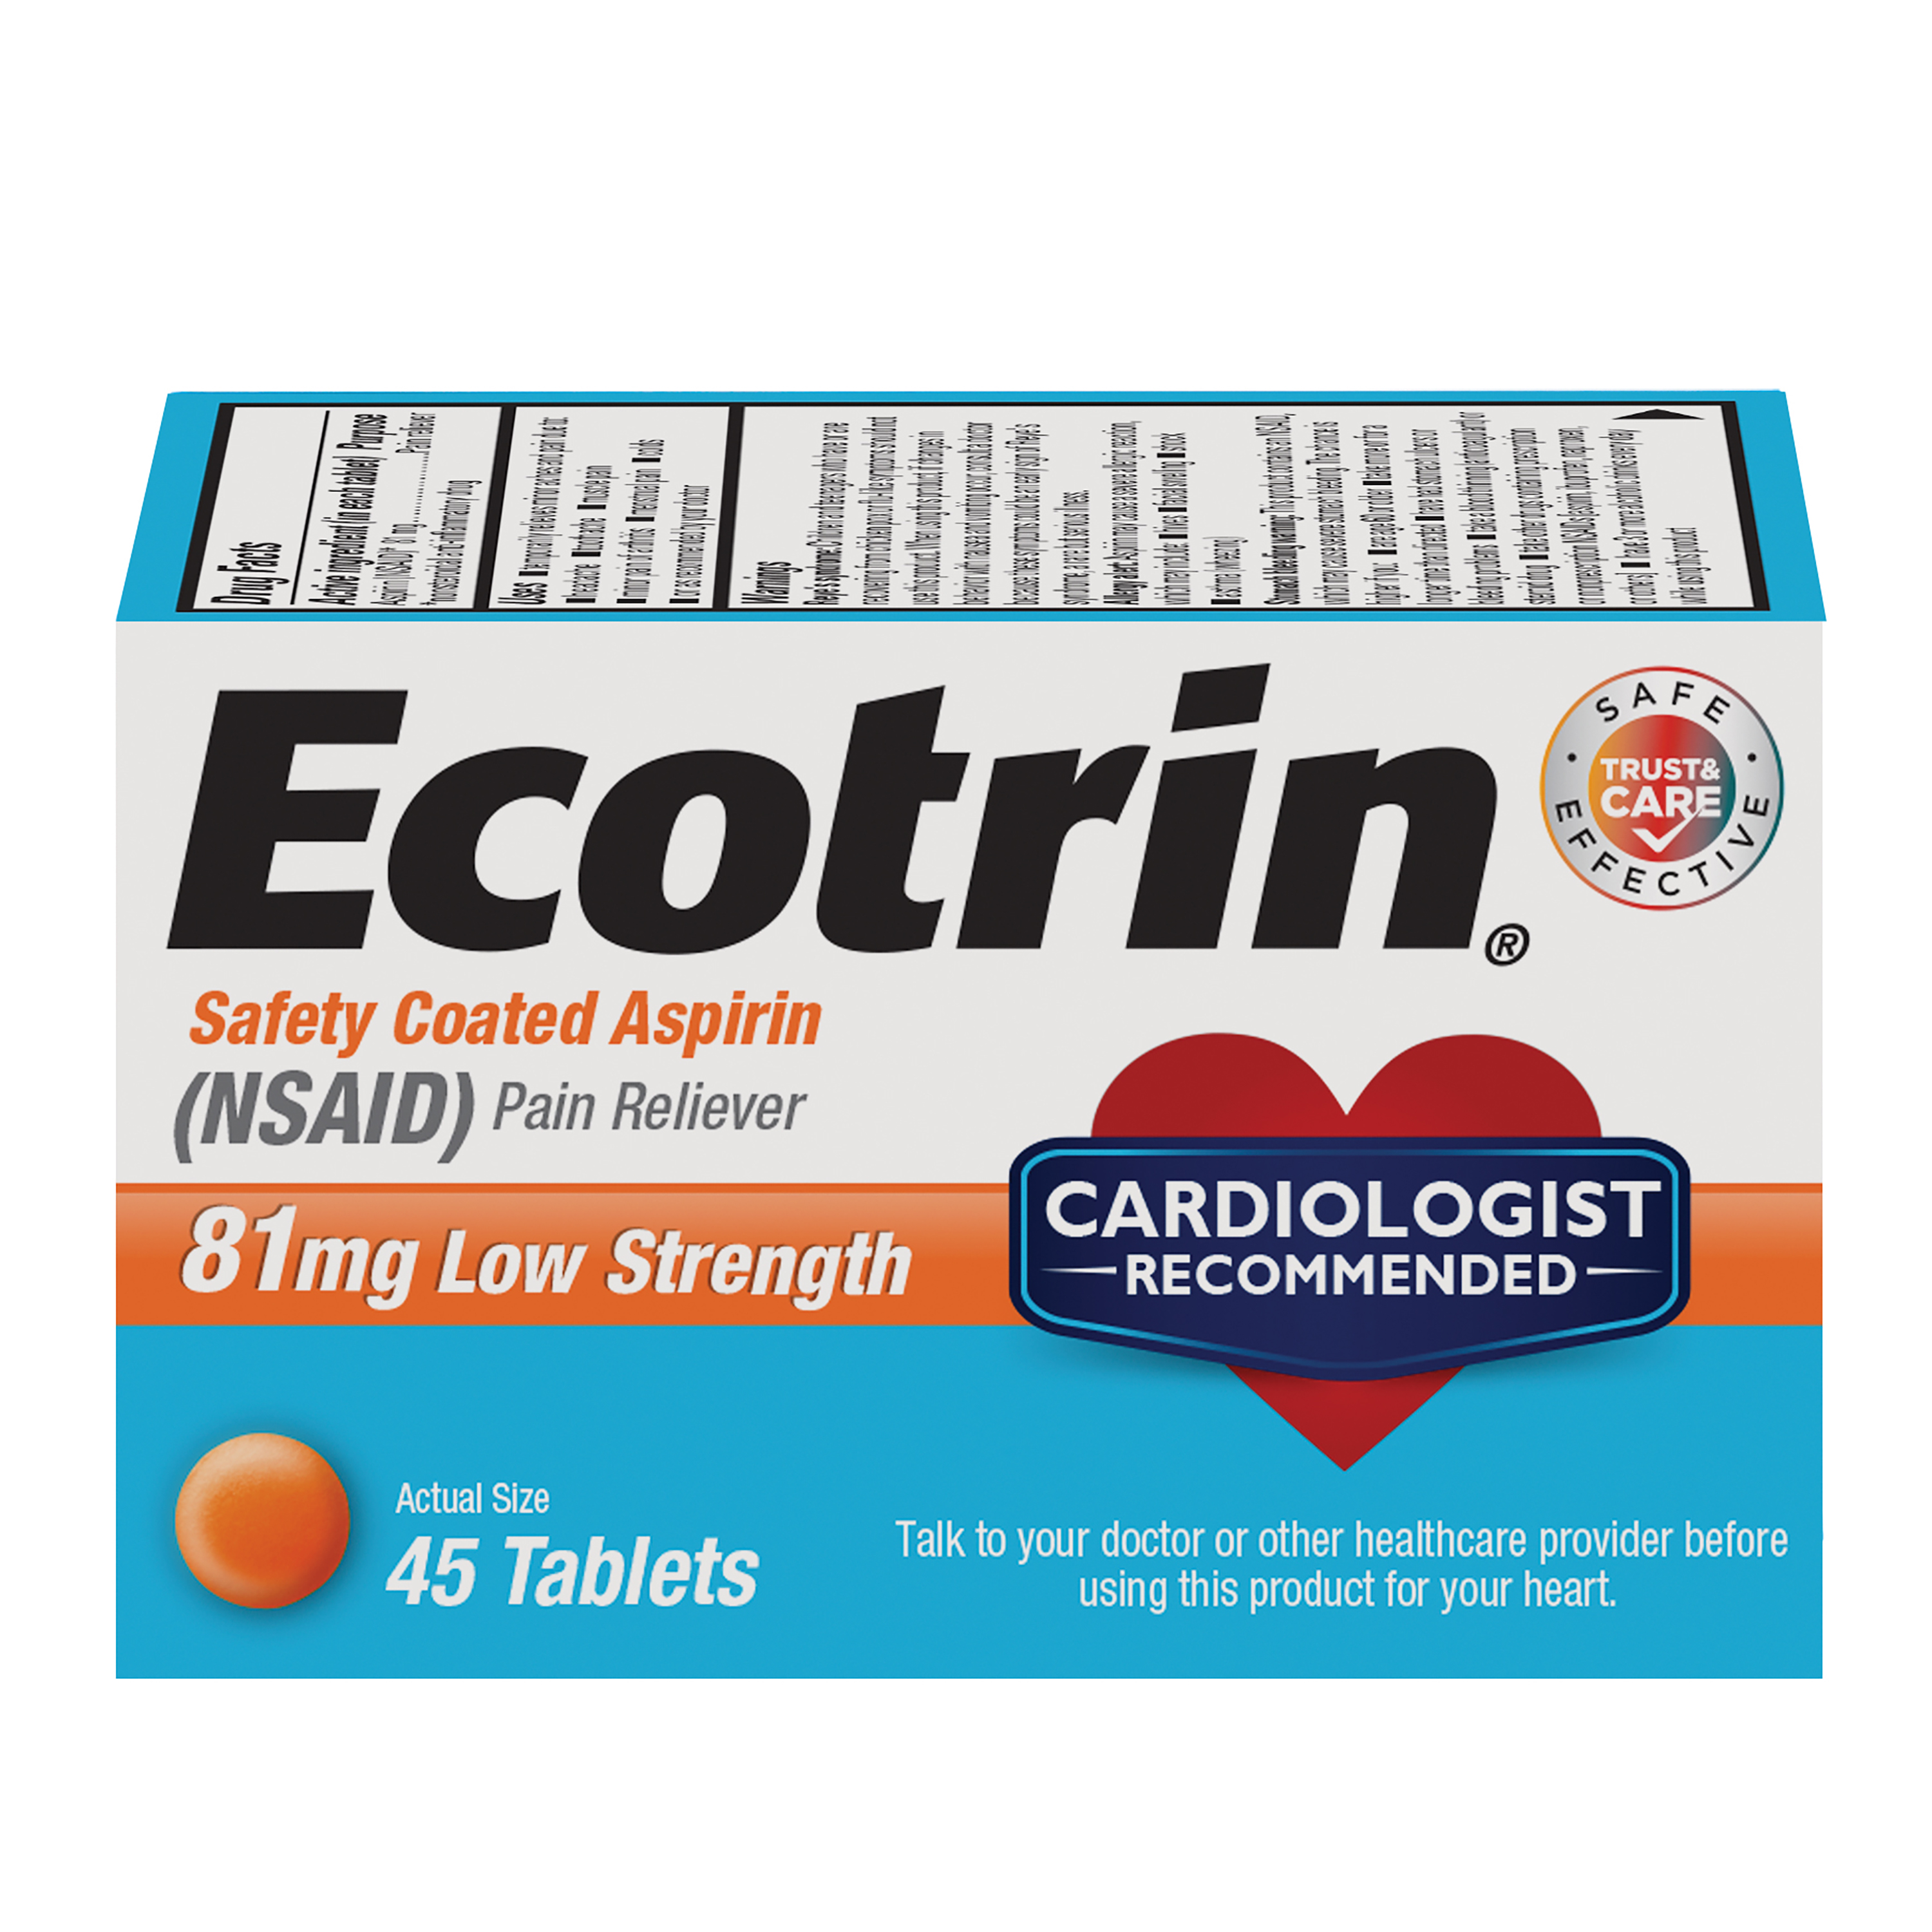 Ecotrin Low Strength Safety Coated Aspirin, NSAID, 81mg, 45 Tablets - image 1 of 4